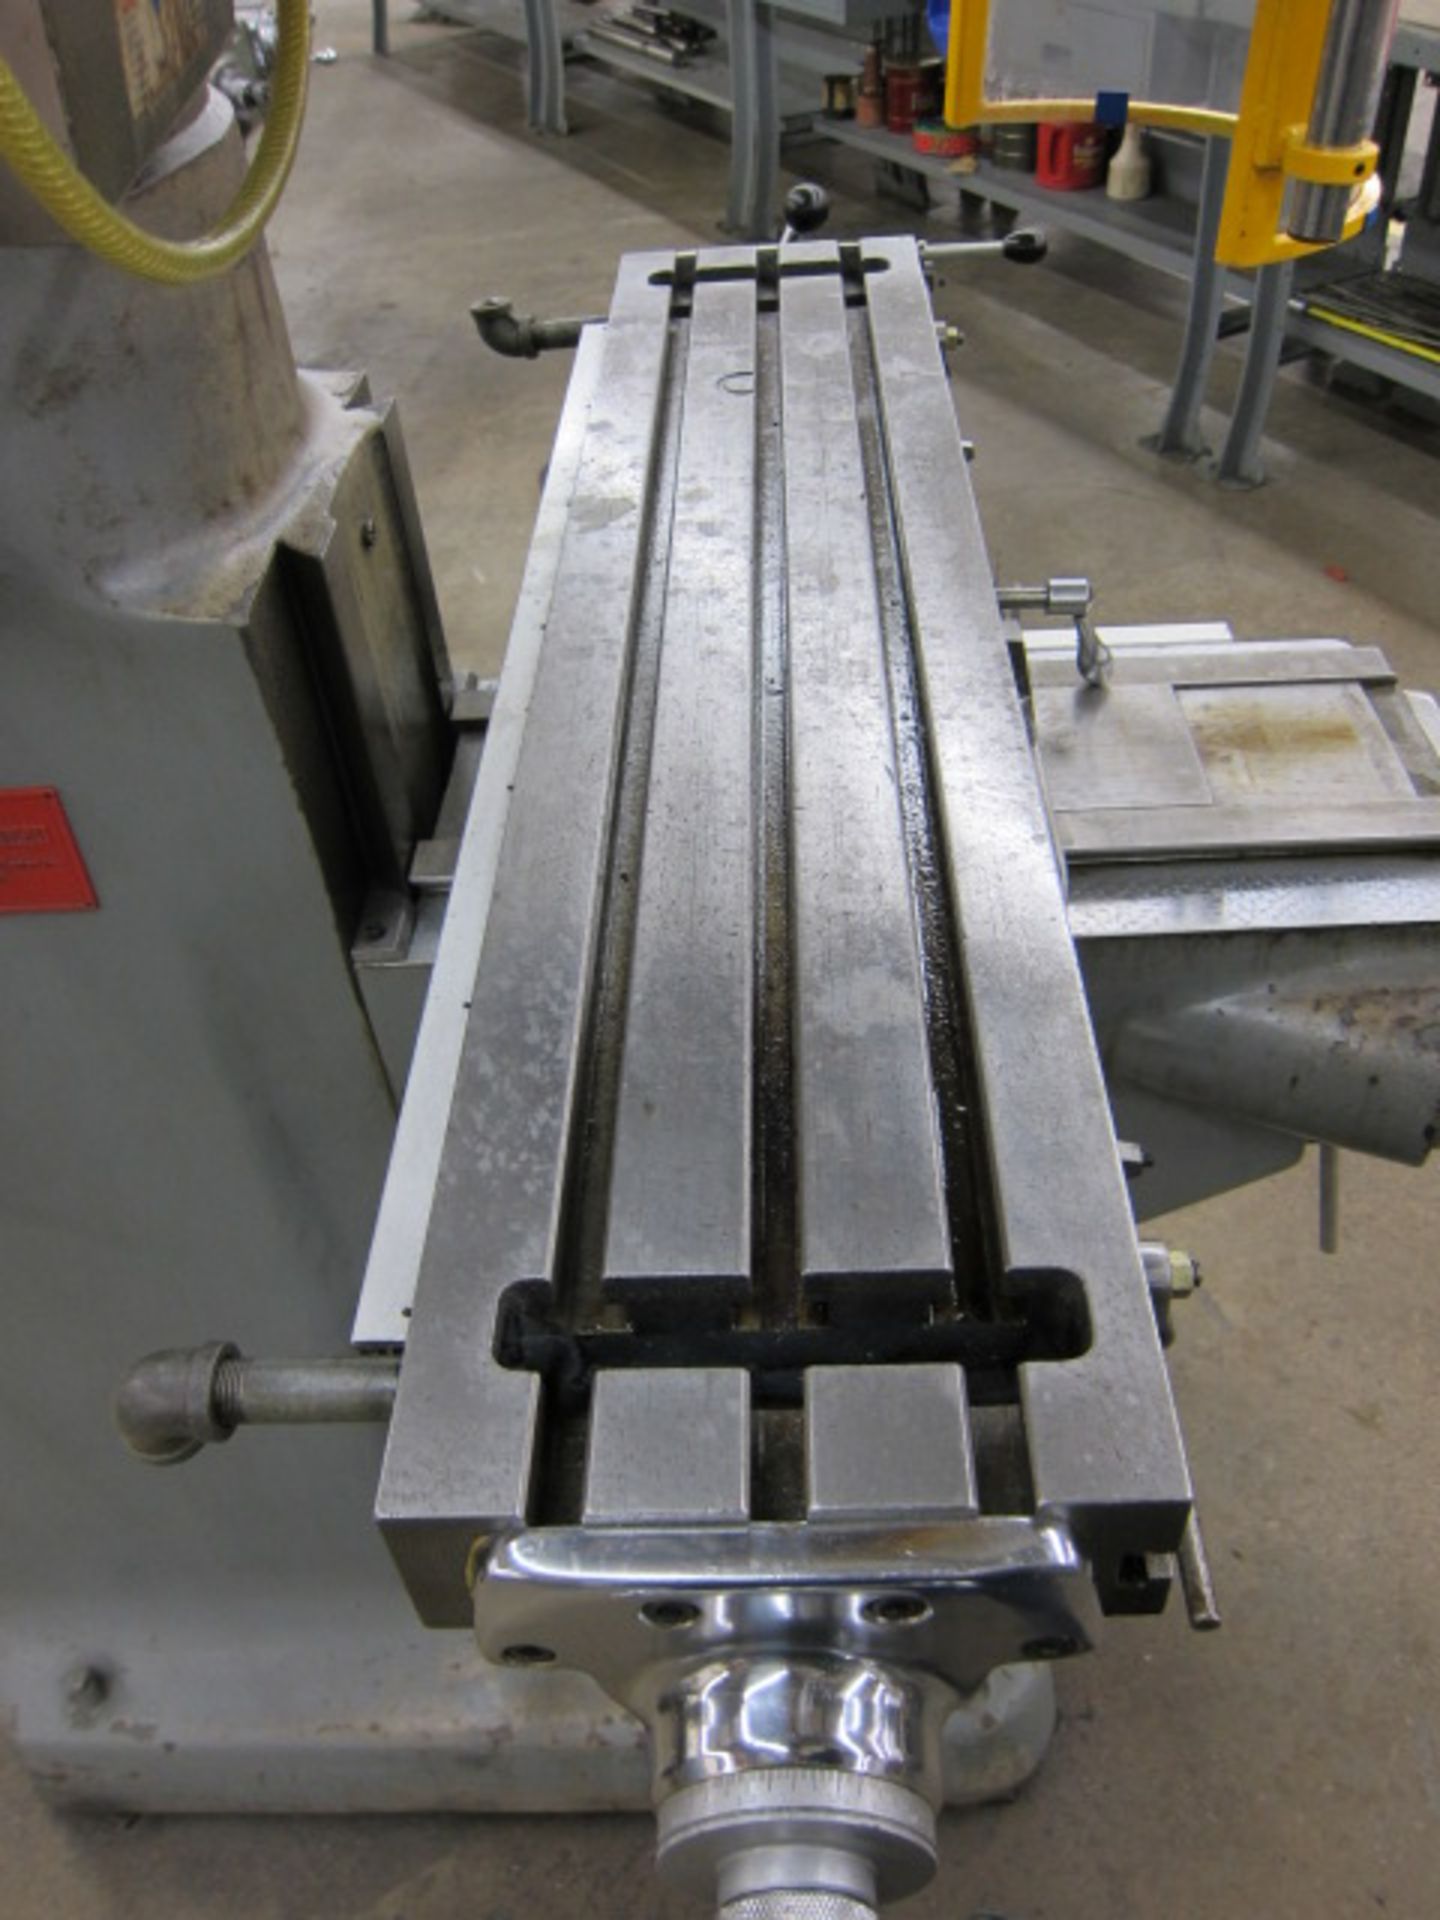 VERTICAL TURRET MILL, BRIDGEPORT SERIES I, 9” x 42” table, long. pwr. feed, 2 HP variable spd., mist - Image 3 of 4